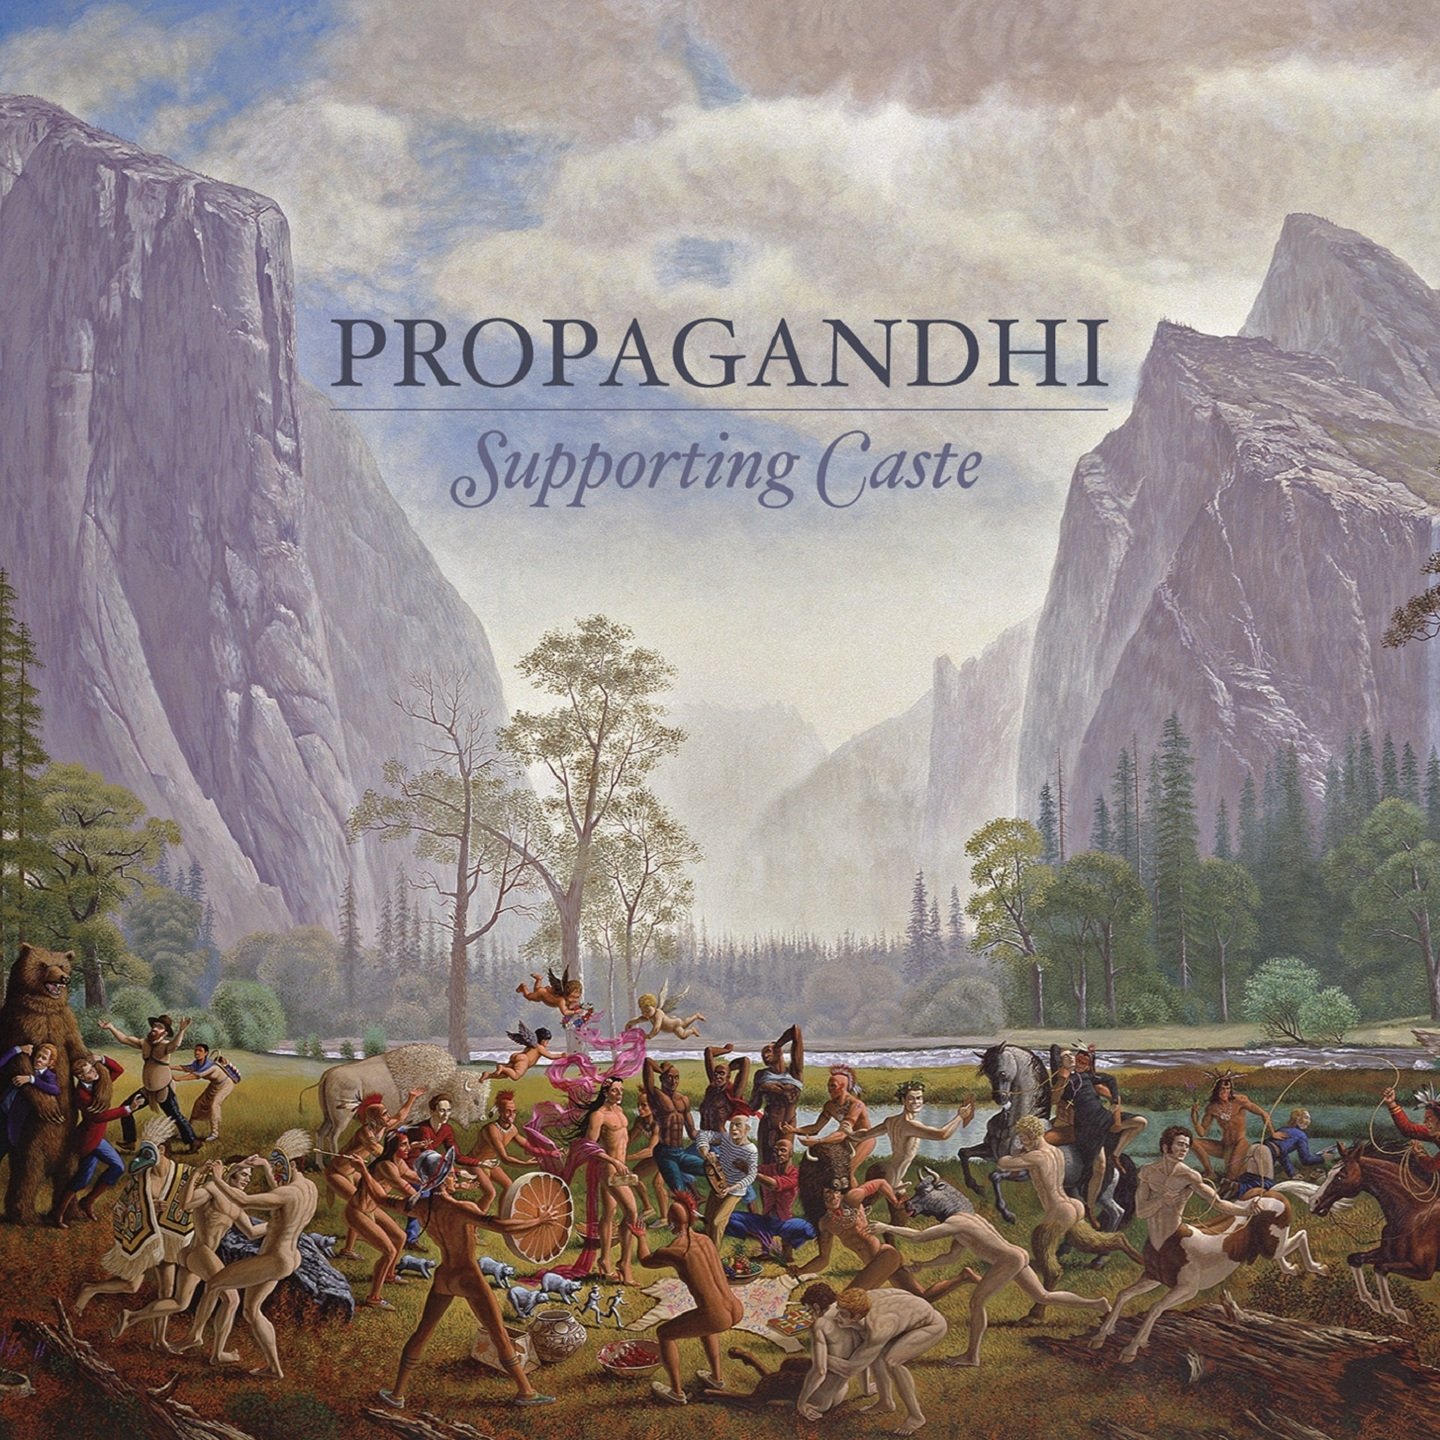 Propagandhi - Supporting Caste (2009) FLAC Download